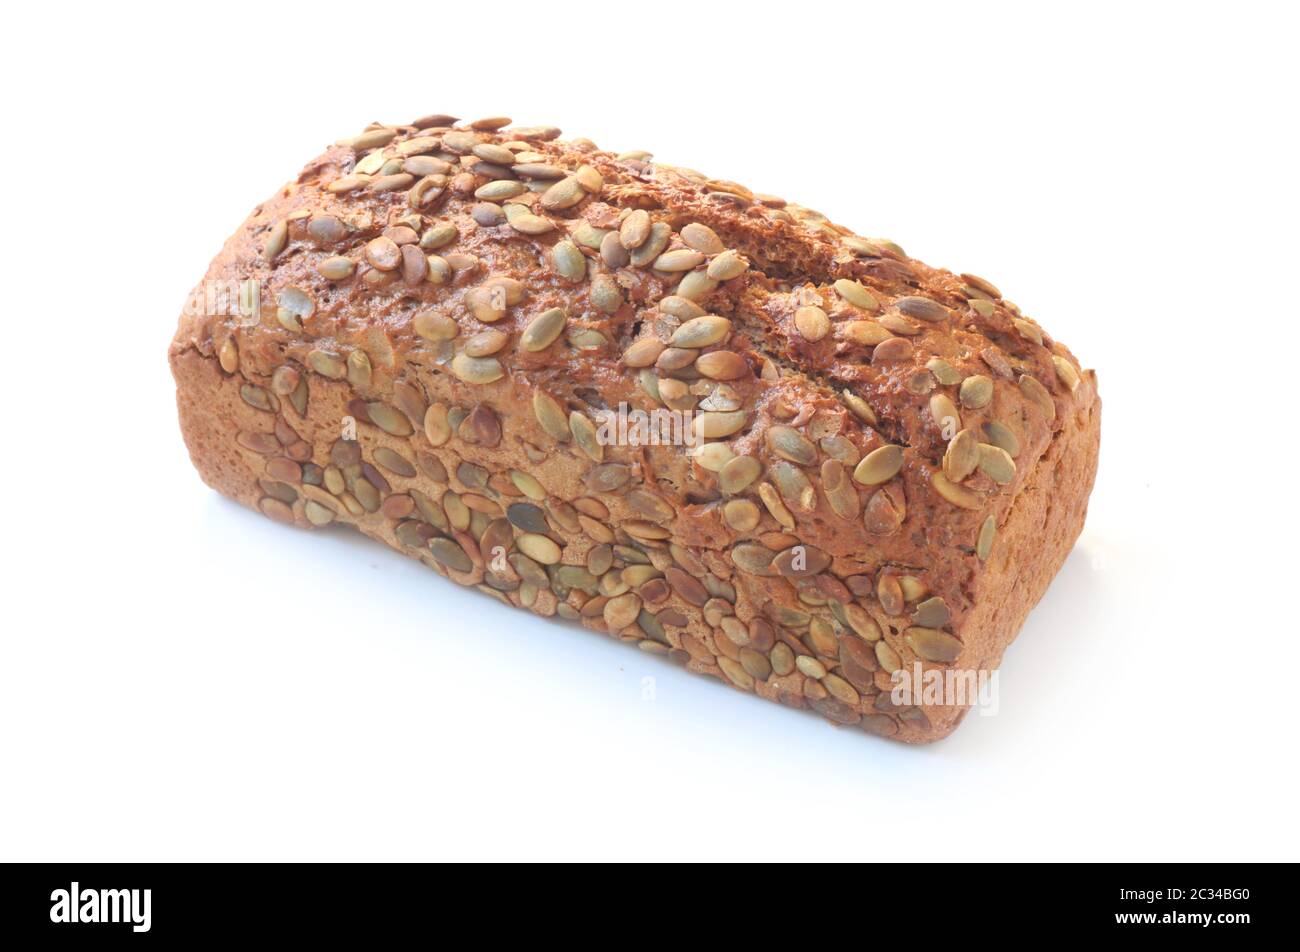 A Loaf Of Multigrain Bread With Pumpkin Seeds Stock Photo